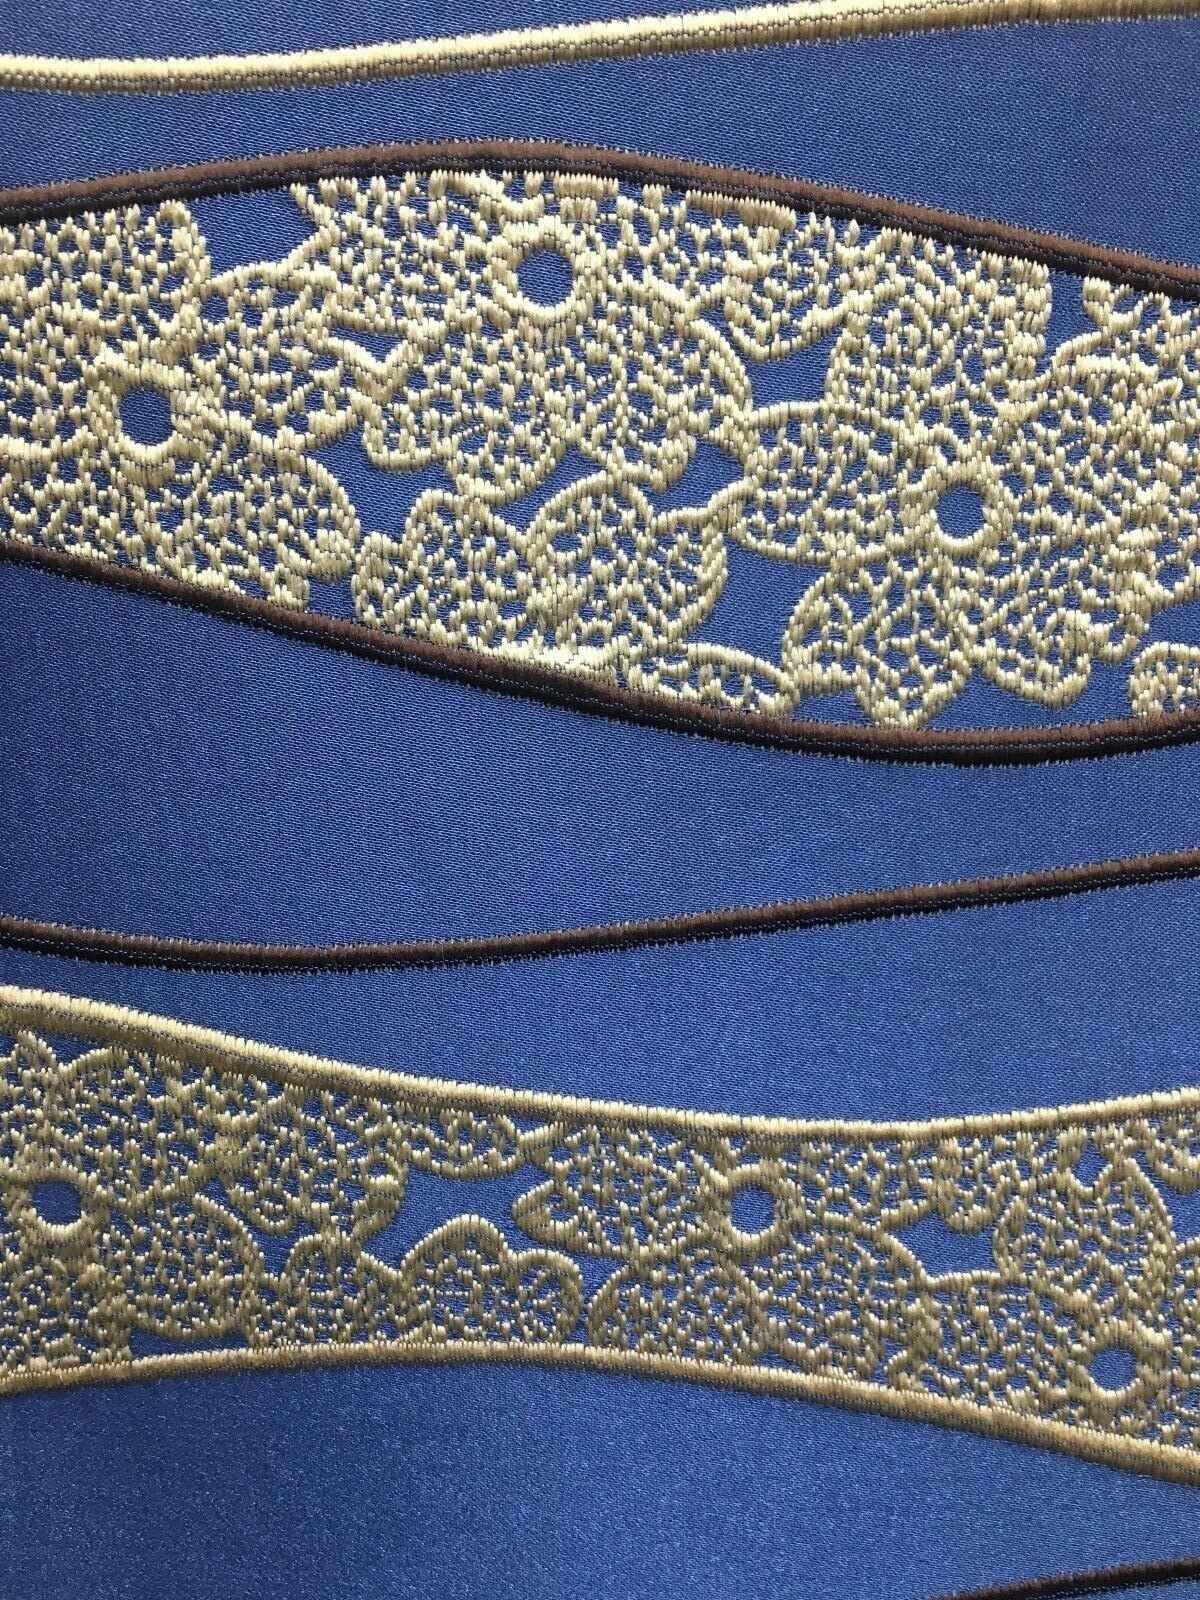 BLUE BEIGE BROWN Floral Brocade Upholstery Drapery Fabric (54 in.) Sold By The Yard